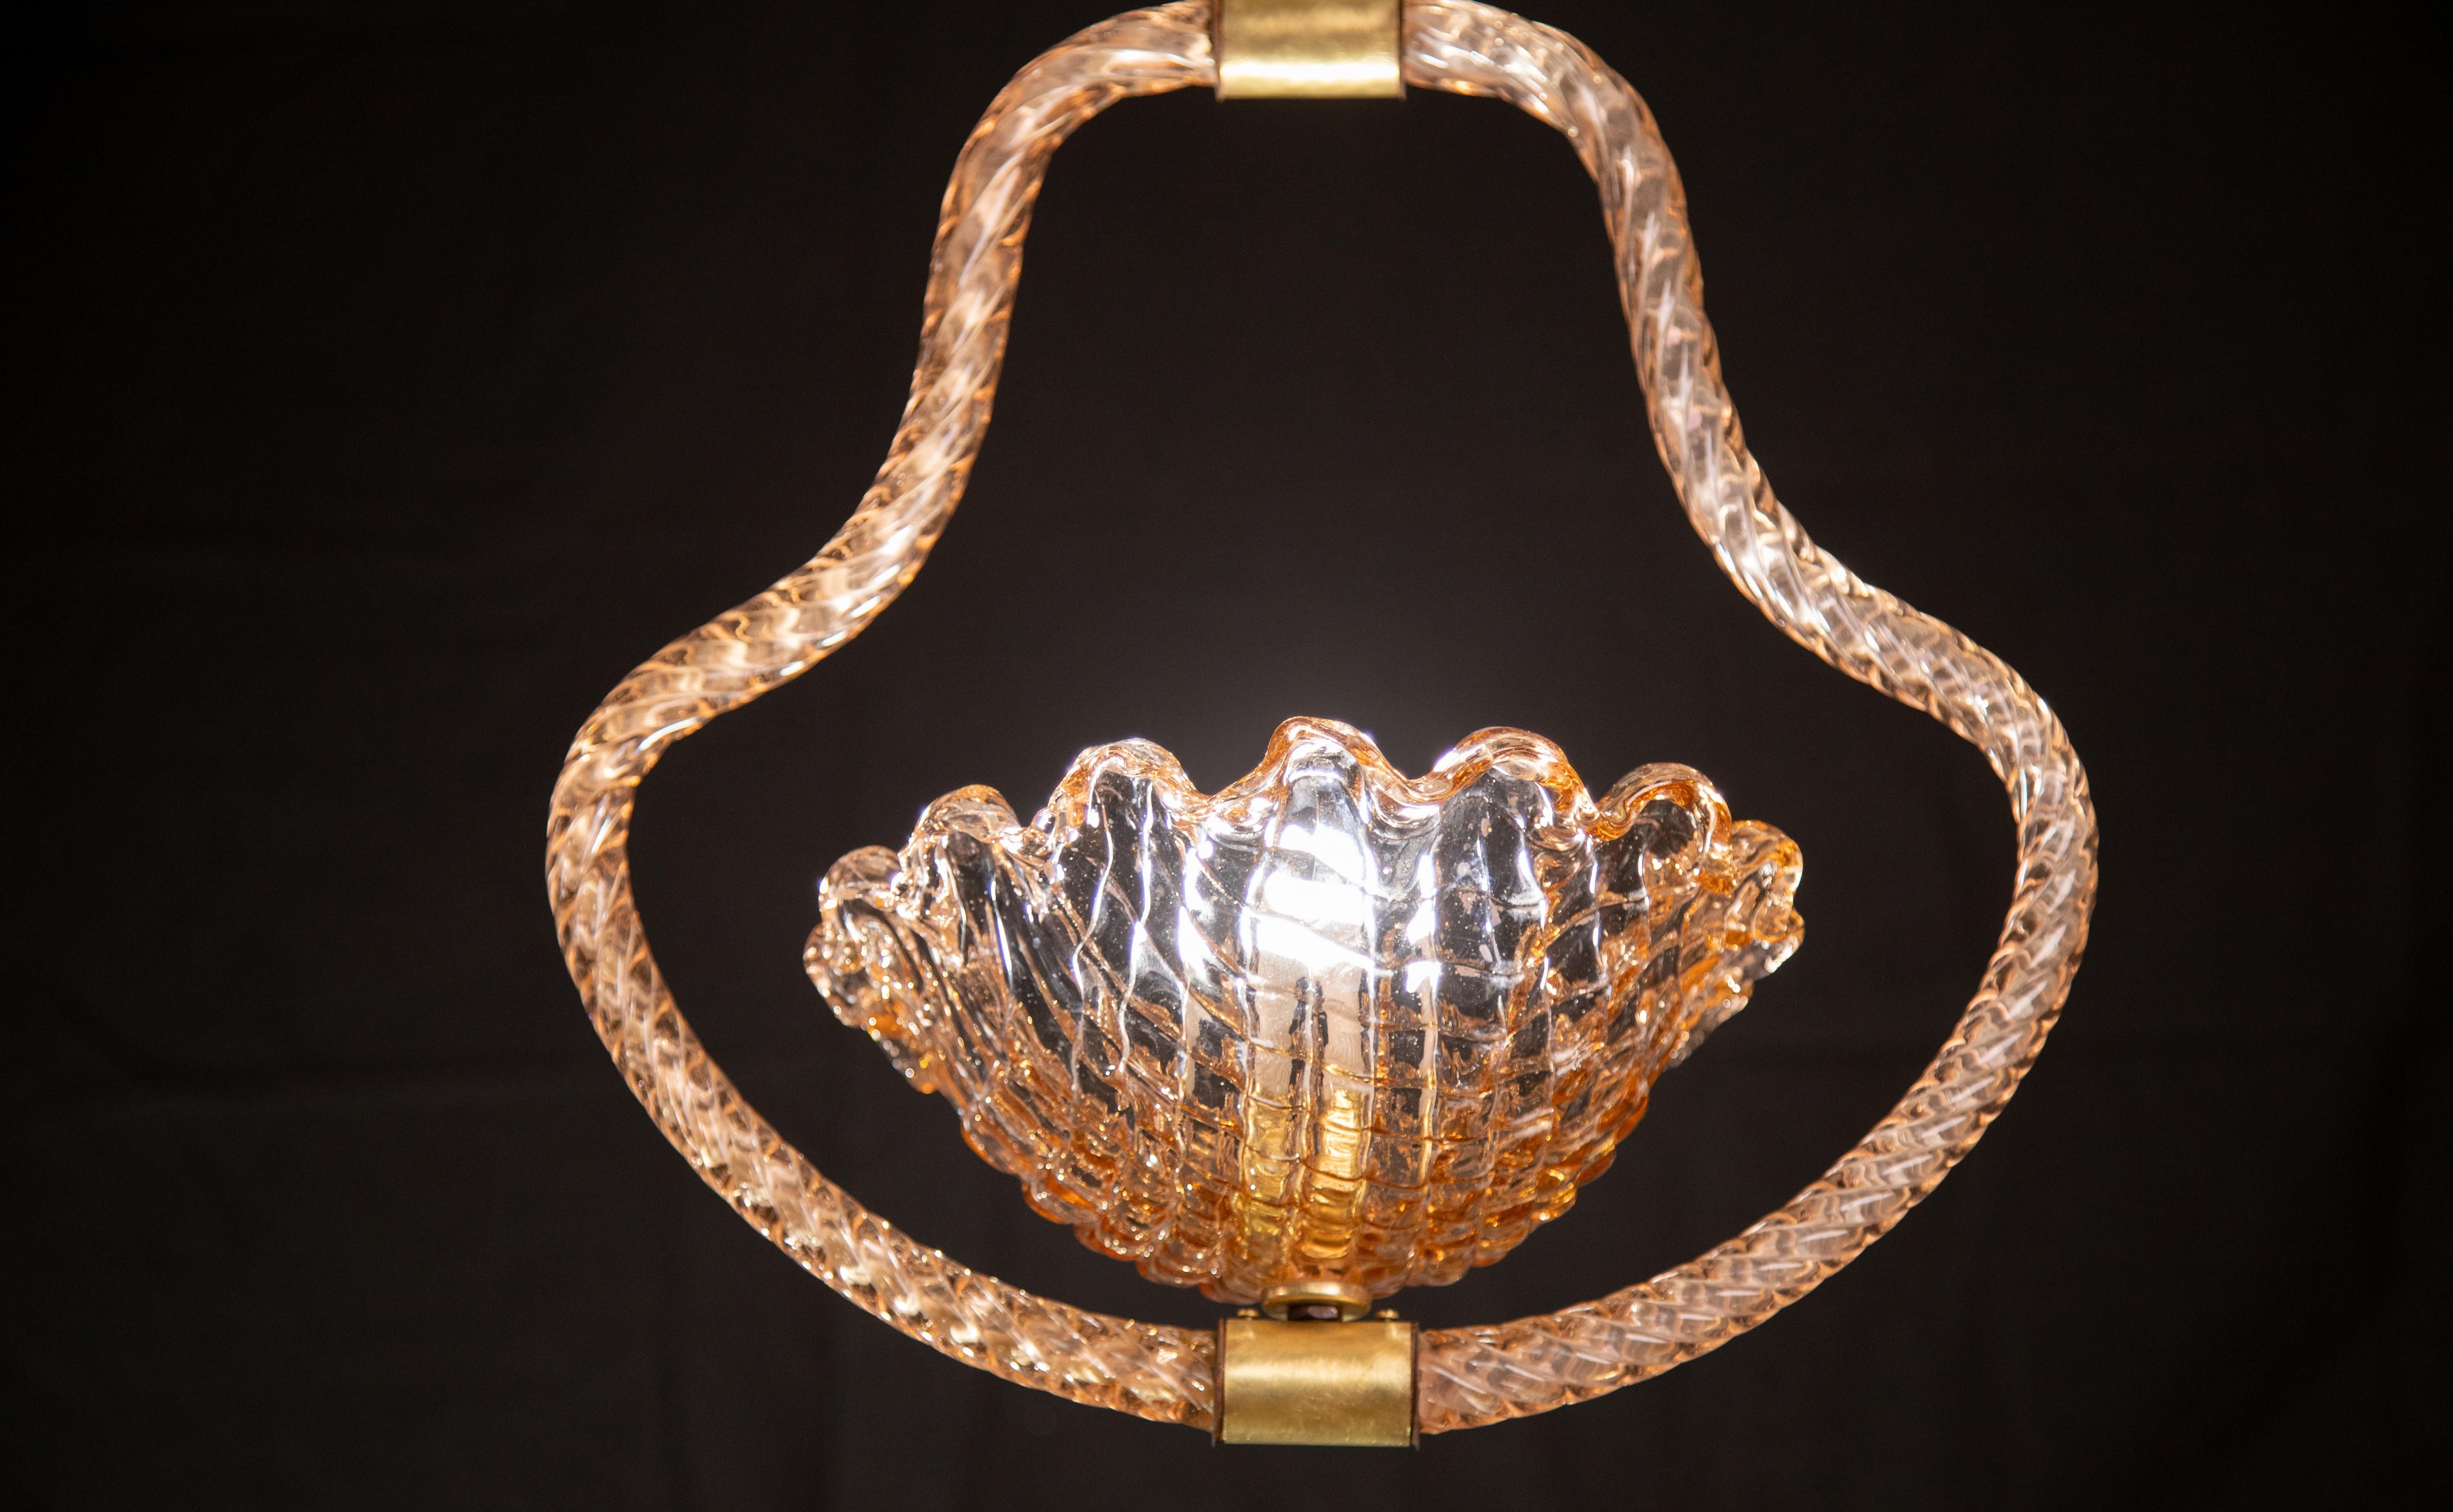 Stunning Murano chandelier by artist Ercole Barovier with rare pink glass.
The pendant consists of 4 glass elements and a brass structure.
It mounts a European standard e27 lamp.
It measures 80 centimetres in height and 40 centimetres in